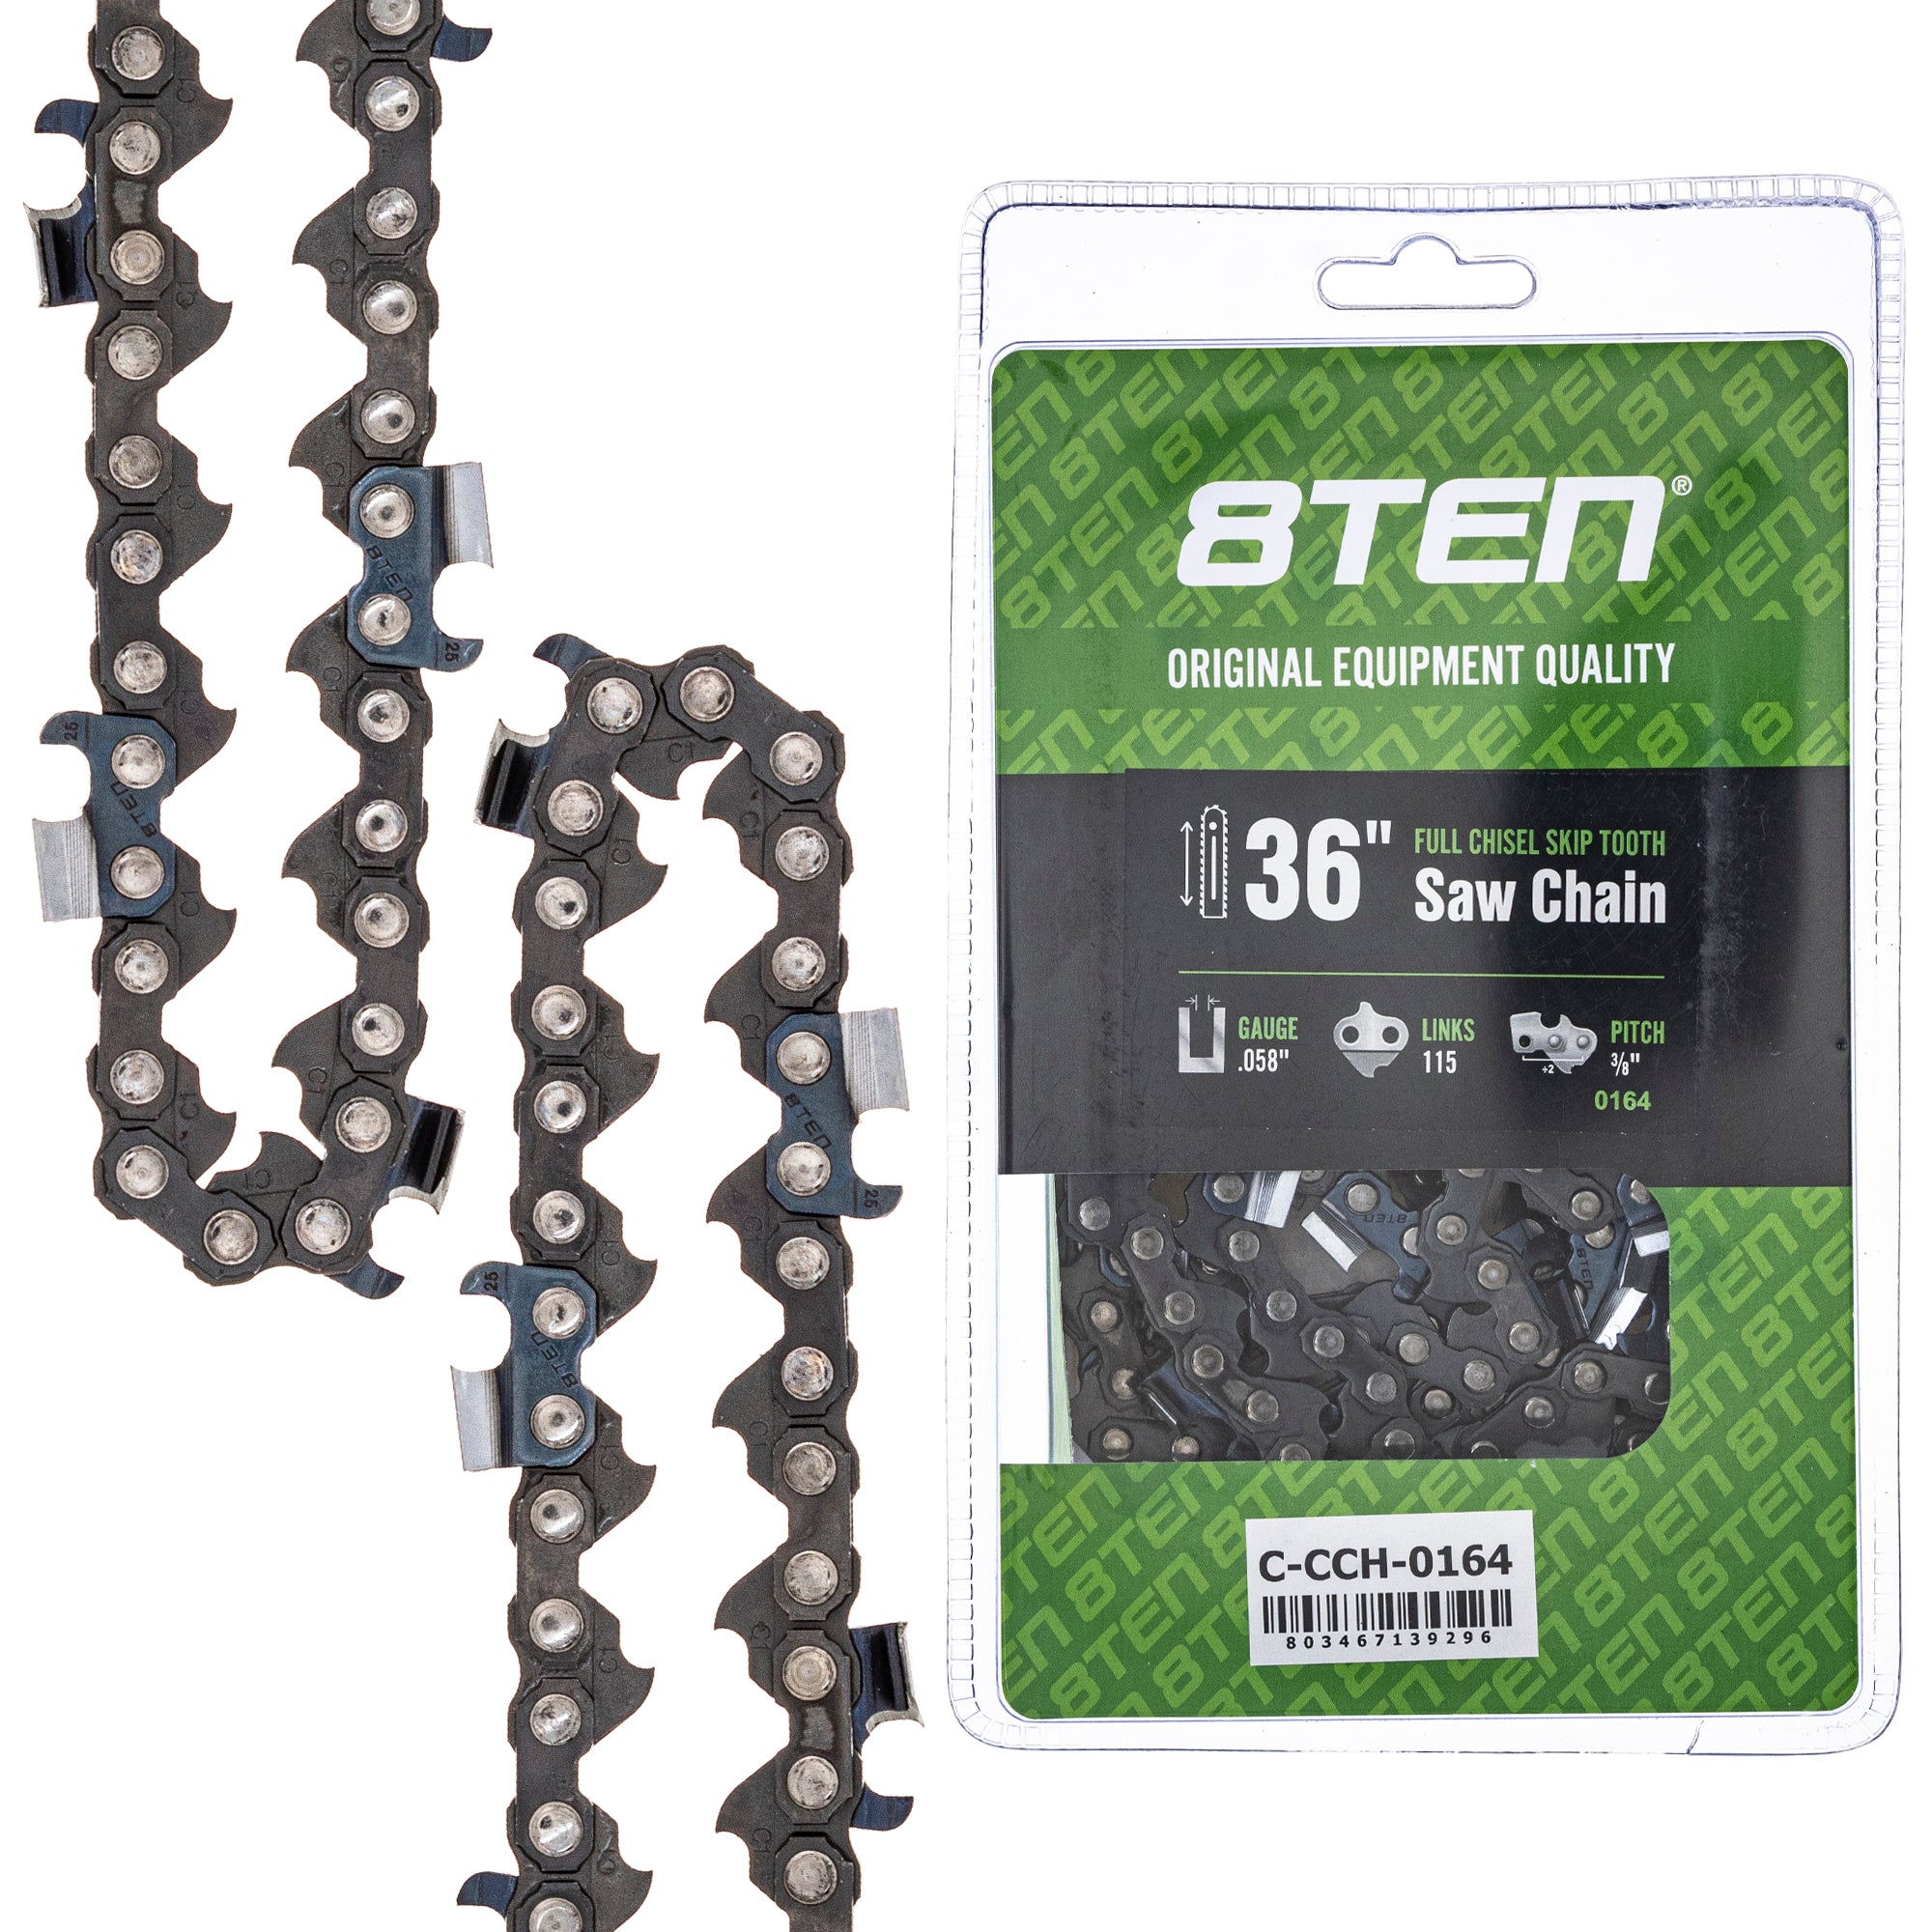 Chainsaw Chain 36 Inch .058 3/8 115DL for zOTHER 395 390XP/XPG/XPW 3120 8TEN 810-CCC2386H